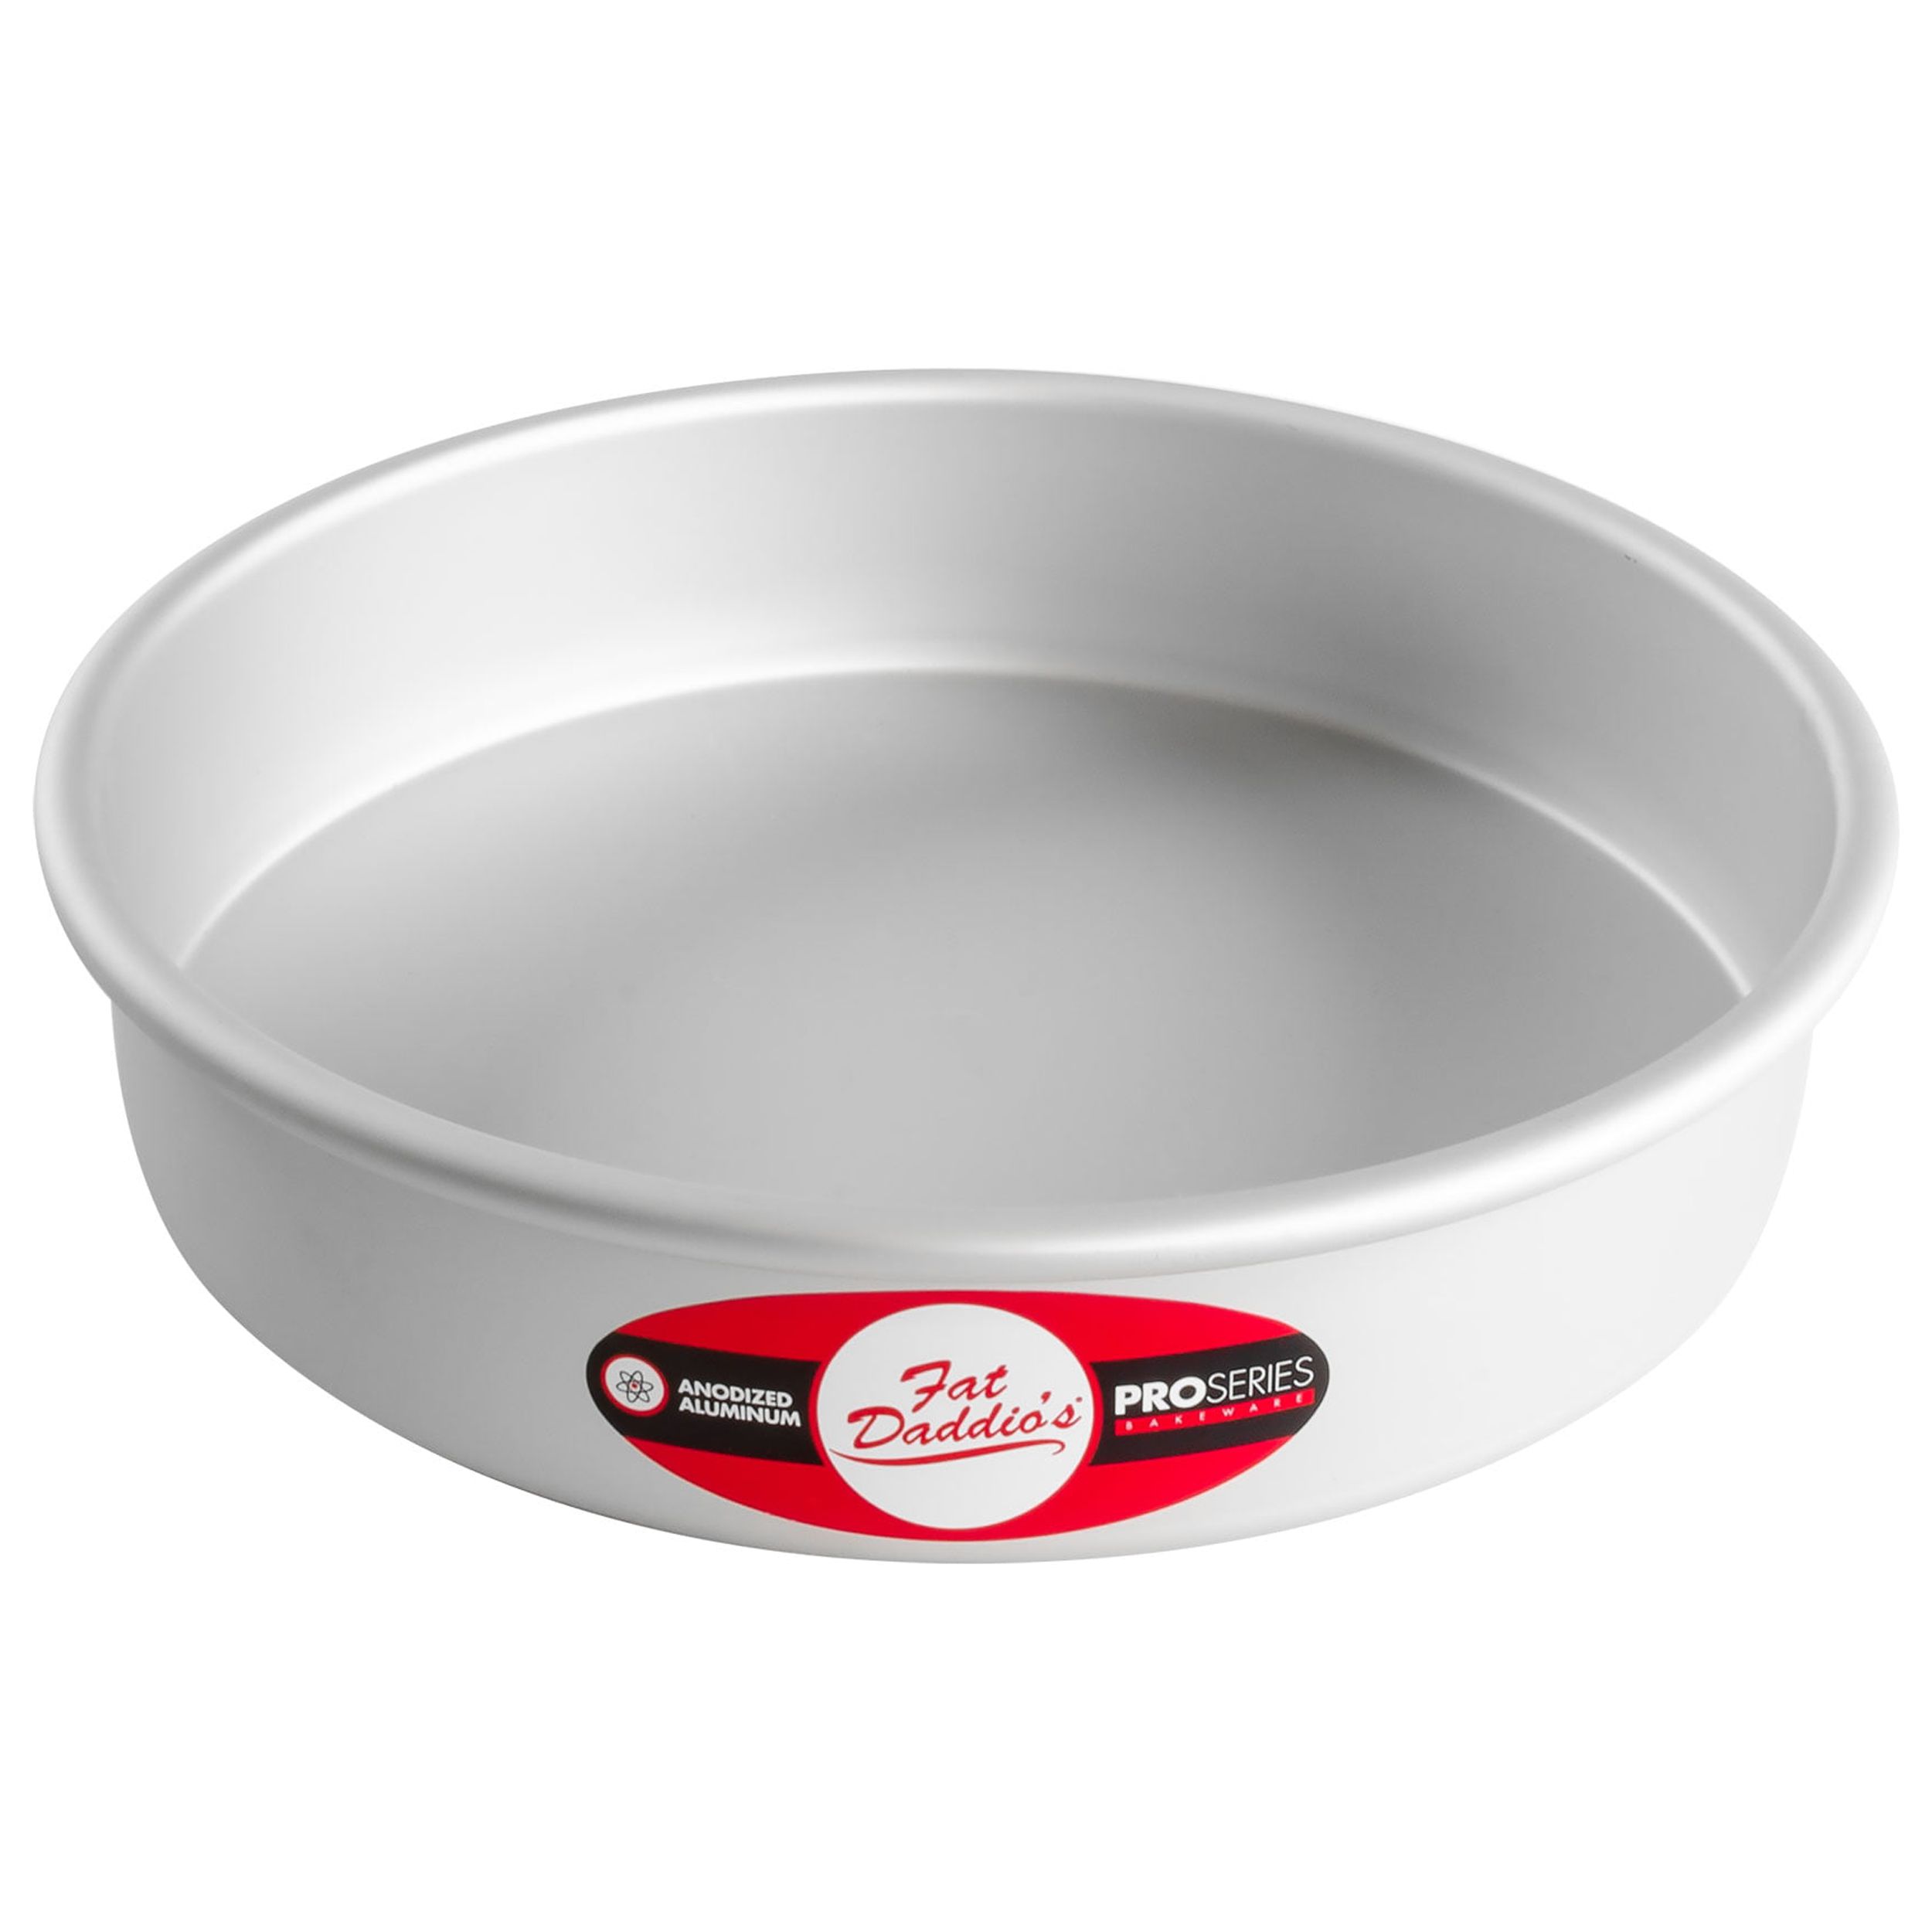 Fat Daddio's PRD-92 Anodized Aluminum Round Cake Pan, 9 x 2 inch - image 1 of 4